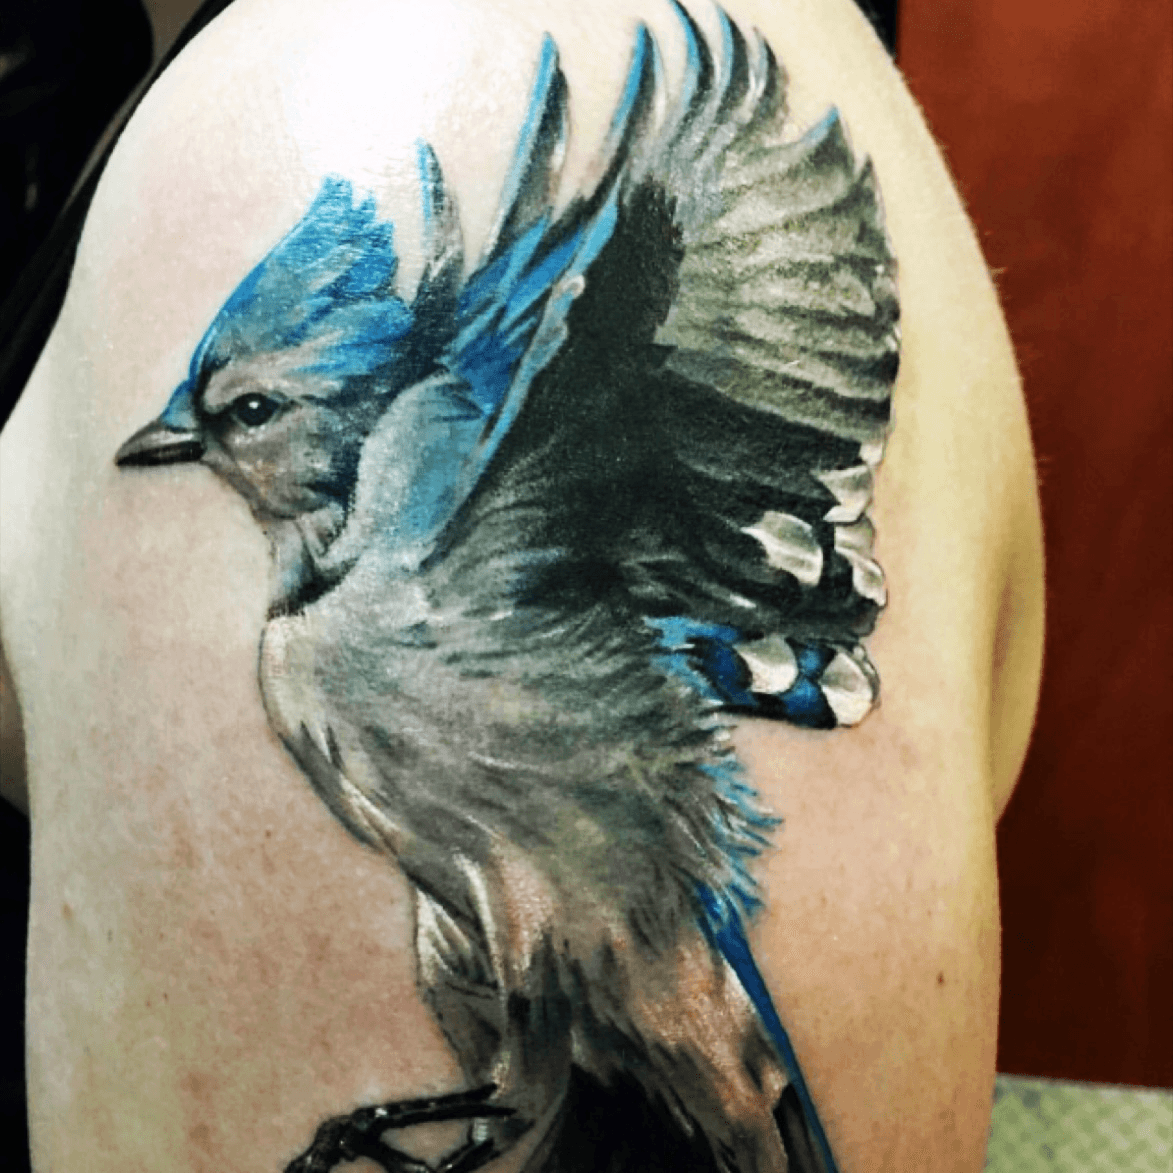 Blue Jay and Canadian themed half sleeve done by Janice sosoink at  Chronic Ink Tattoo  Toronto Canada  Blue jay tattoo Tattoo toronto Ink  tattoo